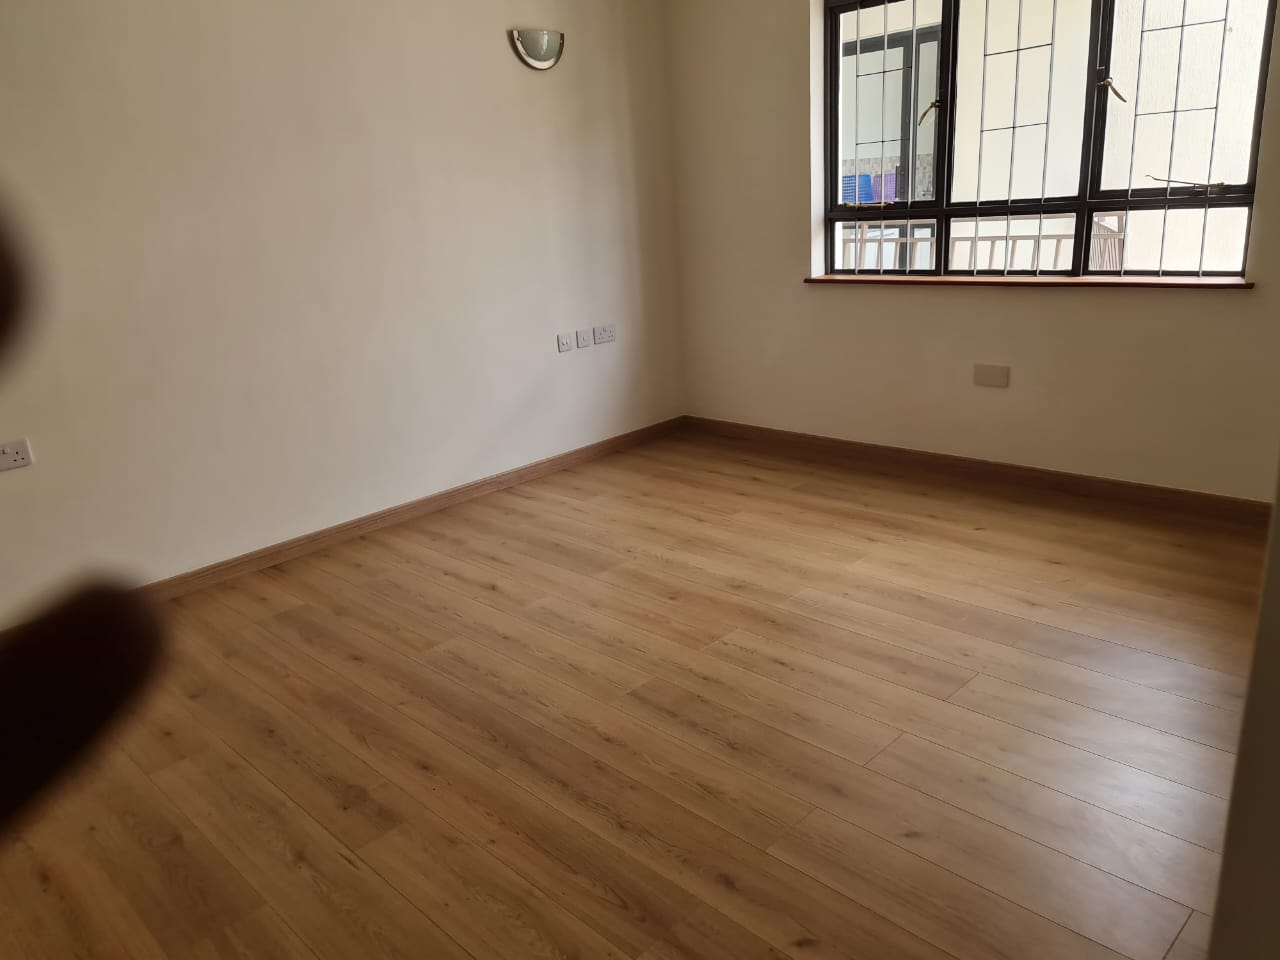 4 Bedroom New Penthouse for Rent in the heart of Westlands with great views, lift, borehole, power backup generator For Rent at Ksh160k (29)